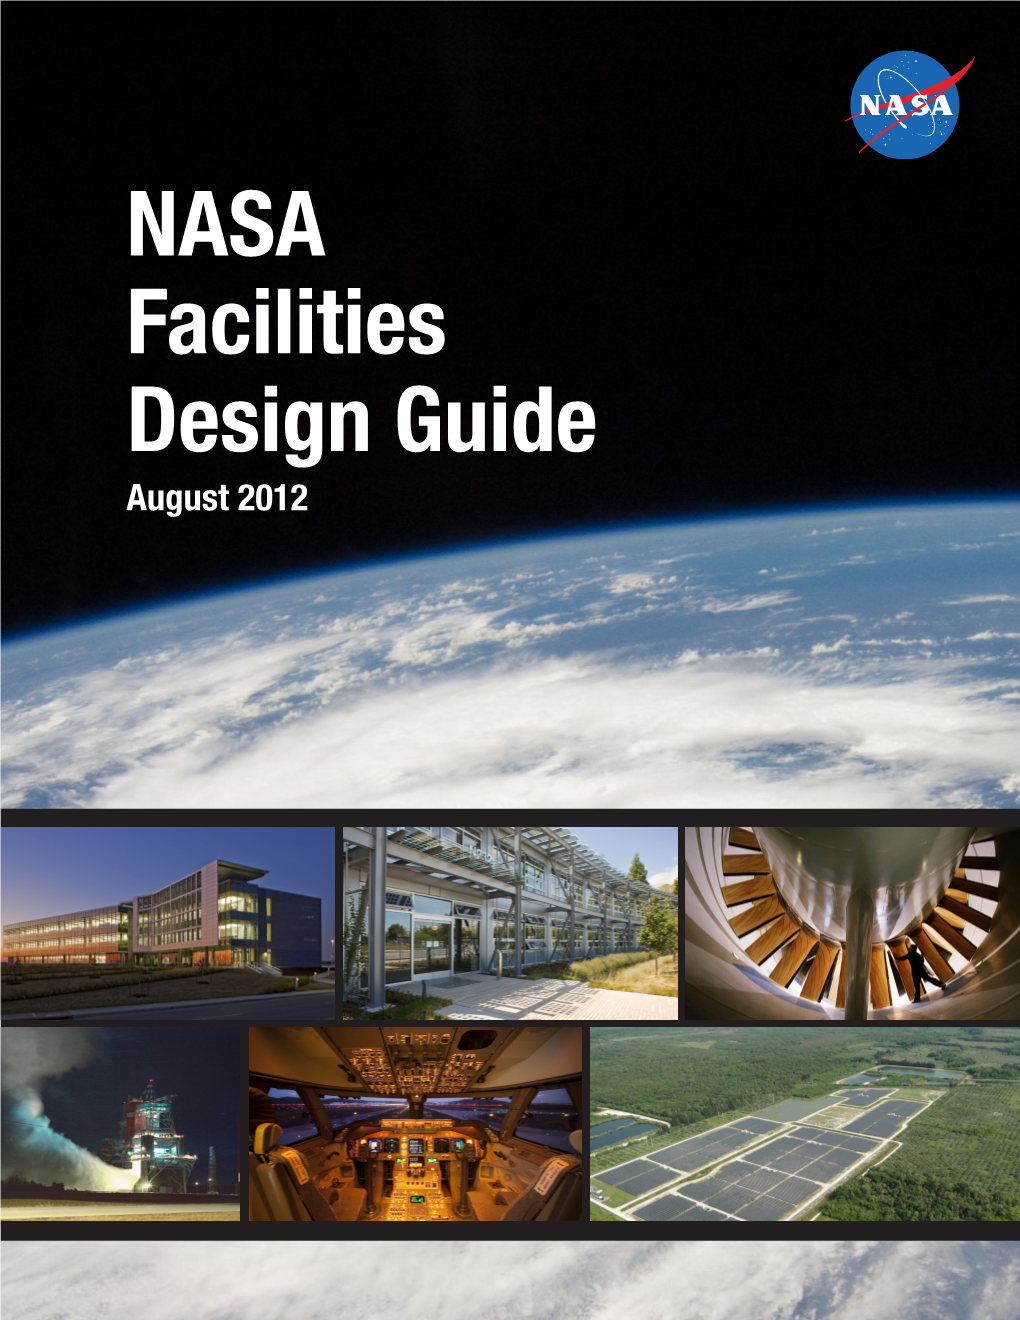 NASA Facilities Design Guide August 2012 Photo Captions: TOP ROW from LEFT: 1) LEED Office Facility for Transition, Building 20, Johnson Space Center